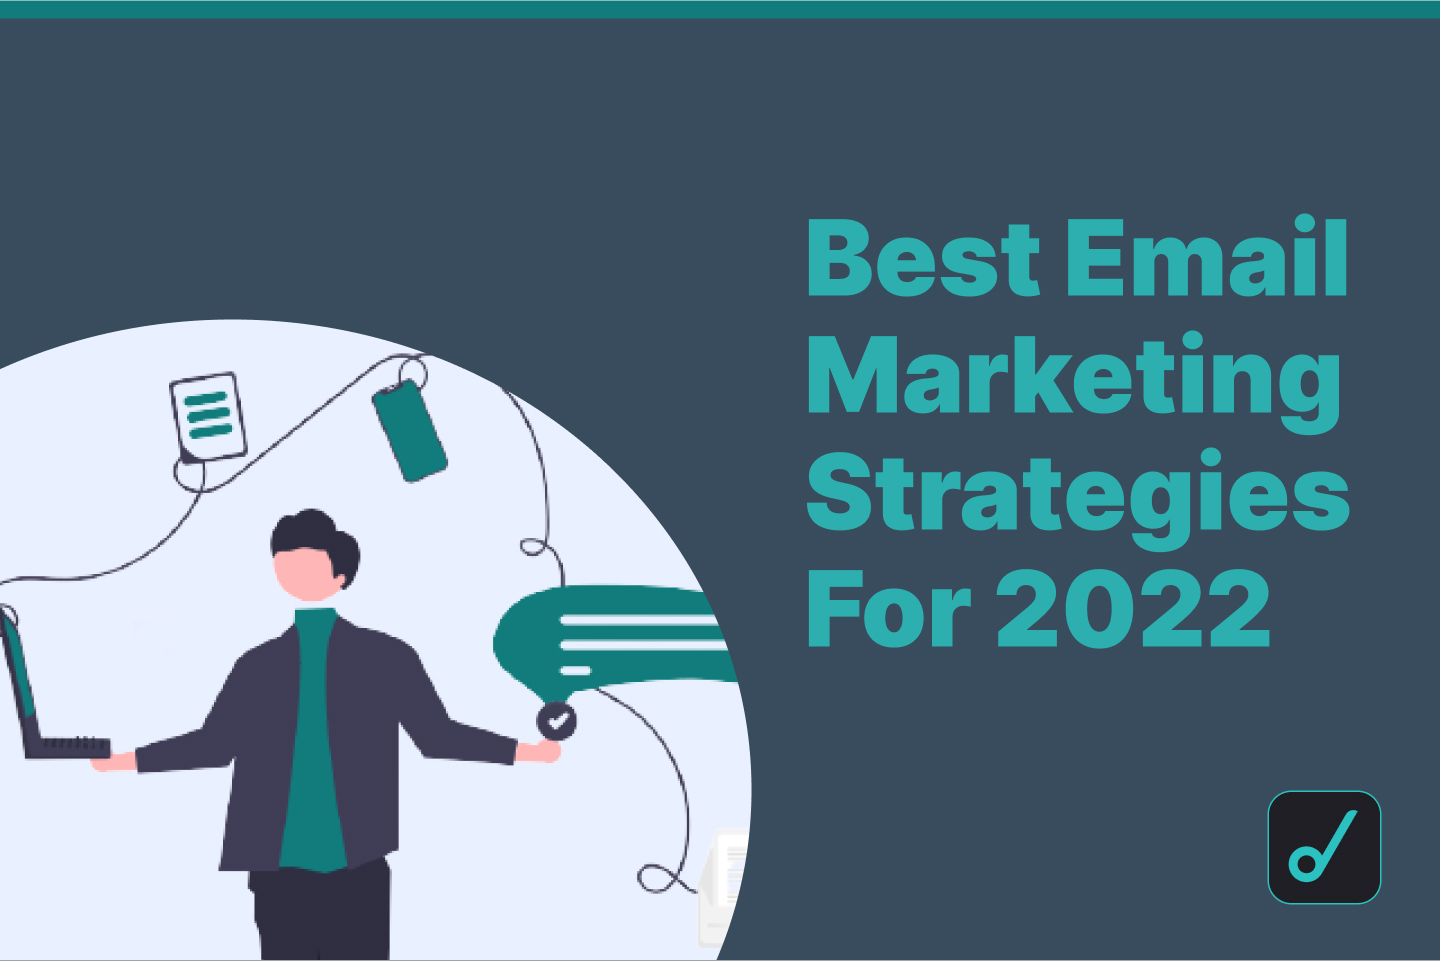 Best Email Marketing Strategies For 2022